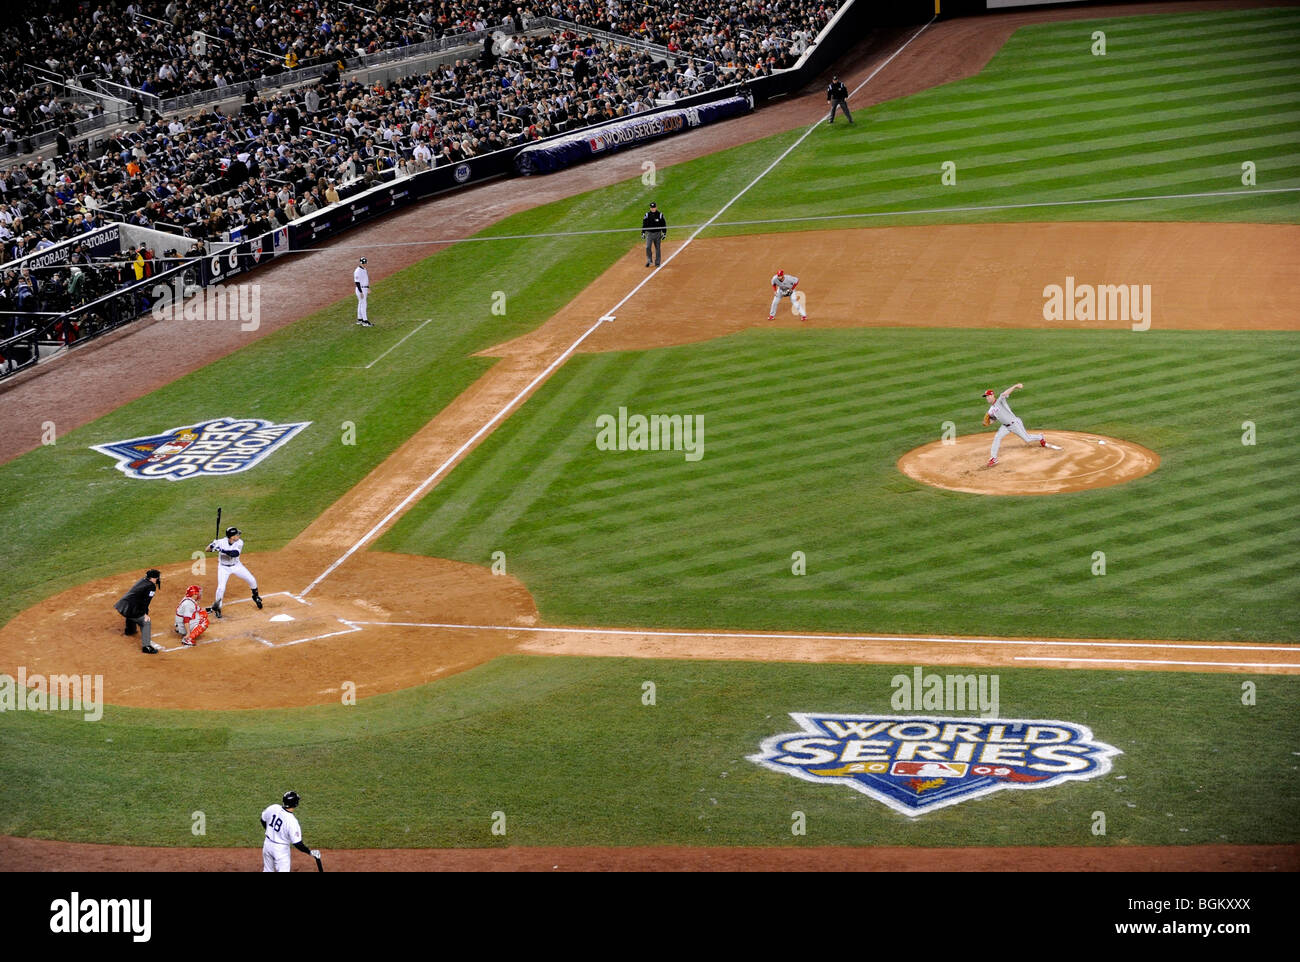 Cliff Lee of the Philadelphia Phillies pitches against Derek Jeter of the NY Yankees in Game One of the 2009 World Series Stock Photo